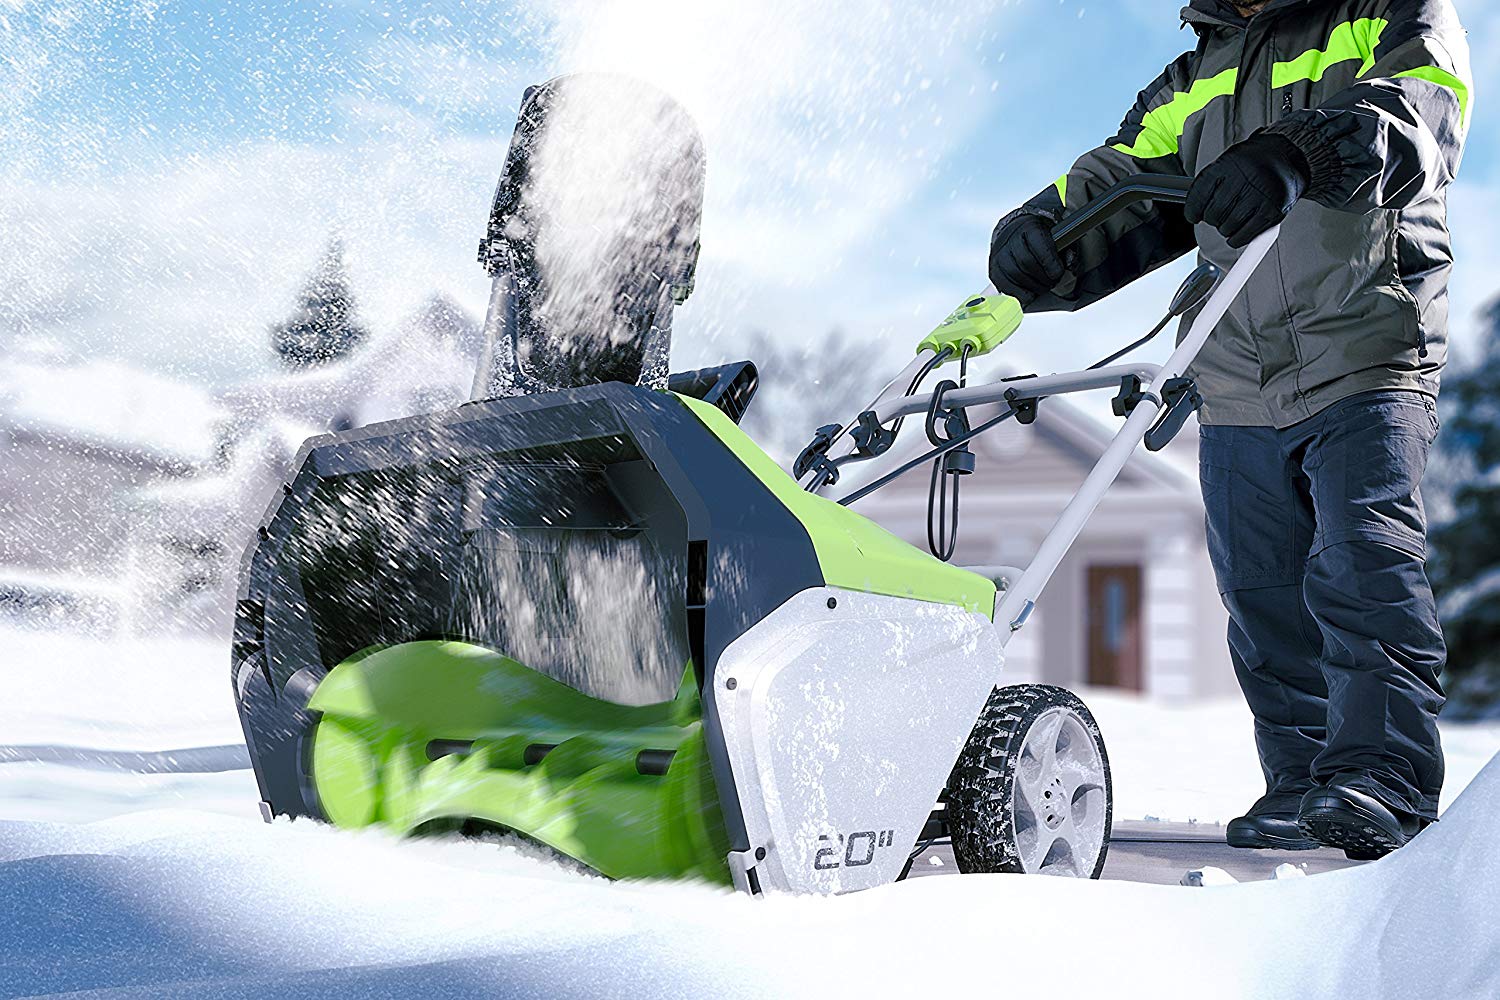 6 Best Heavy-Duty Snow Blowers to Combat Winter Weather (Spring 2022)